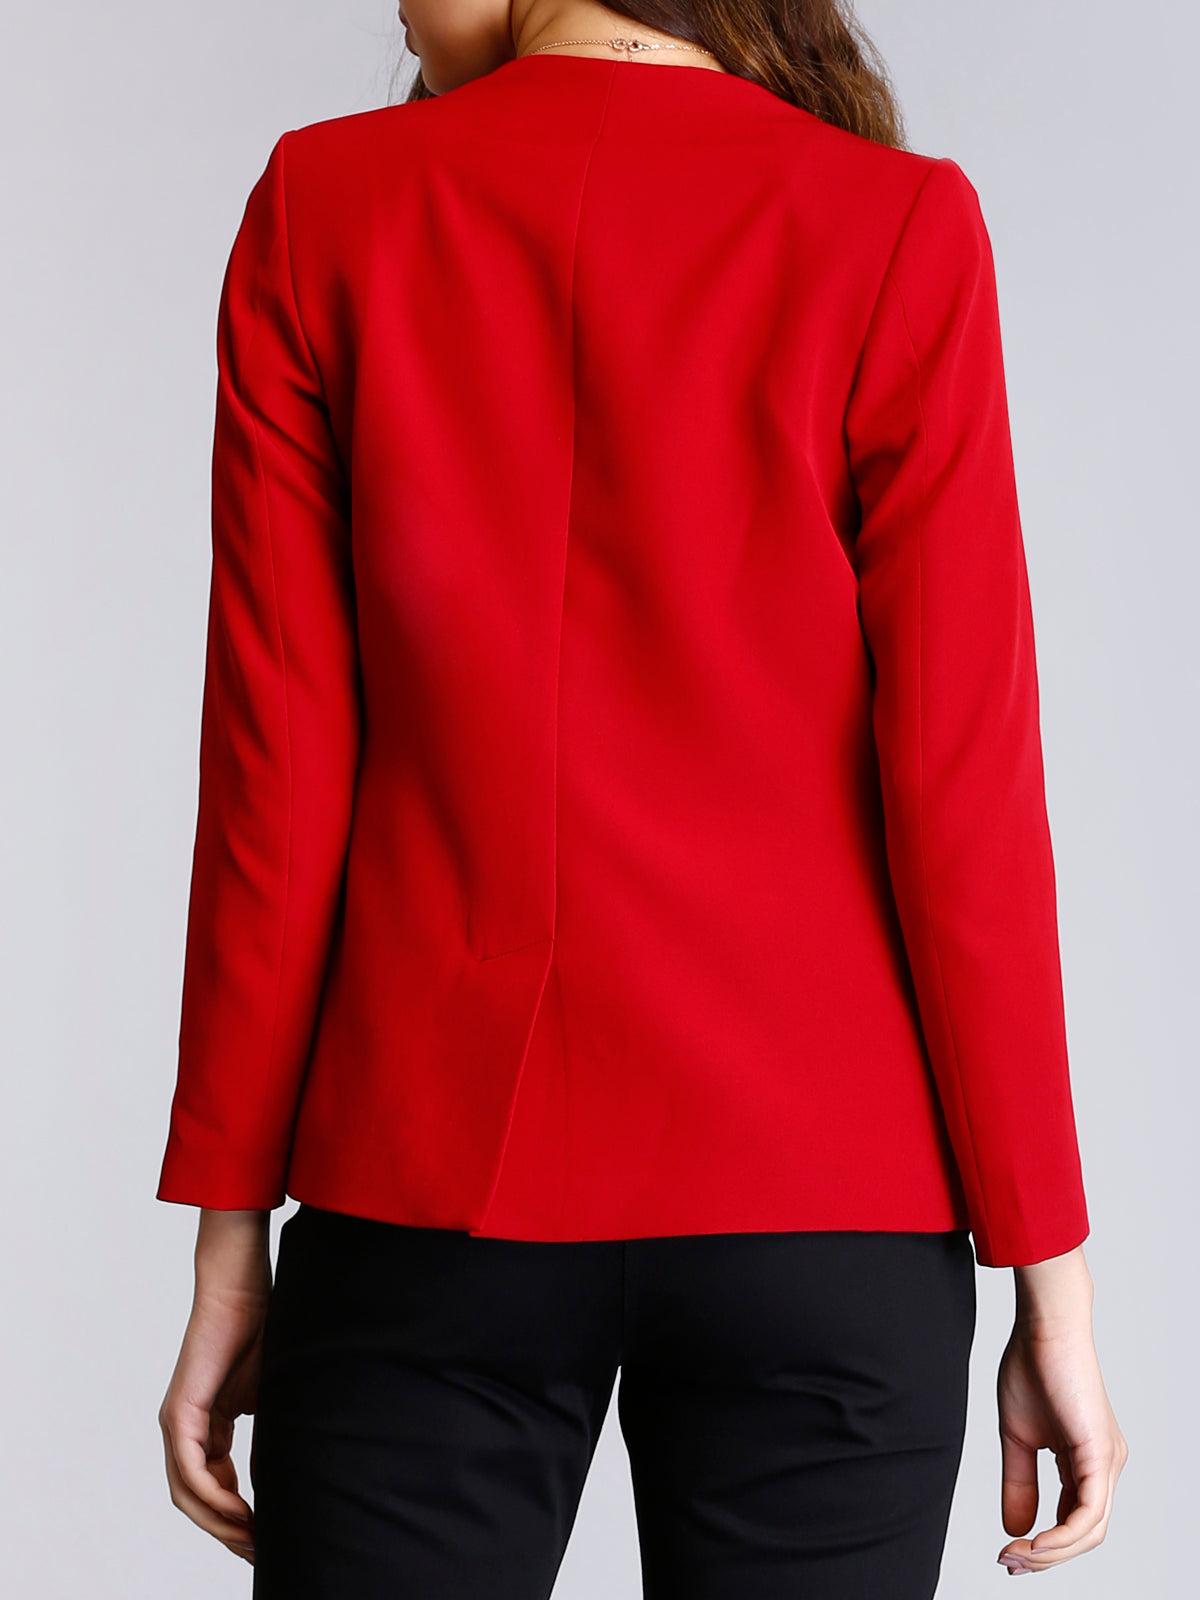 Stylish Jacket With Hook Closure - Red| Formal Jackets